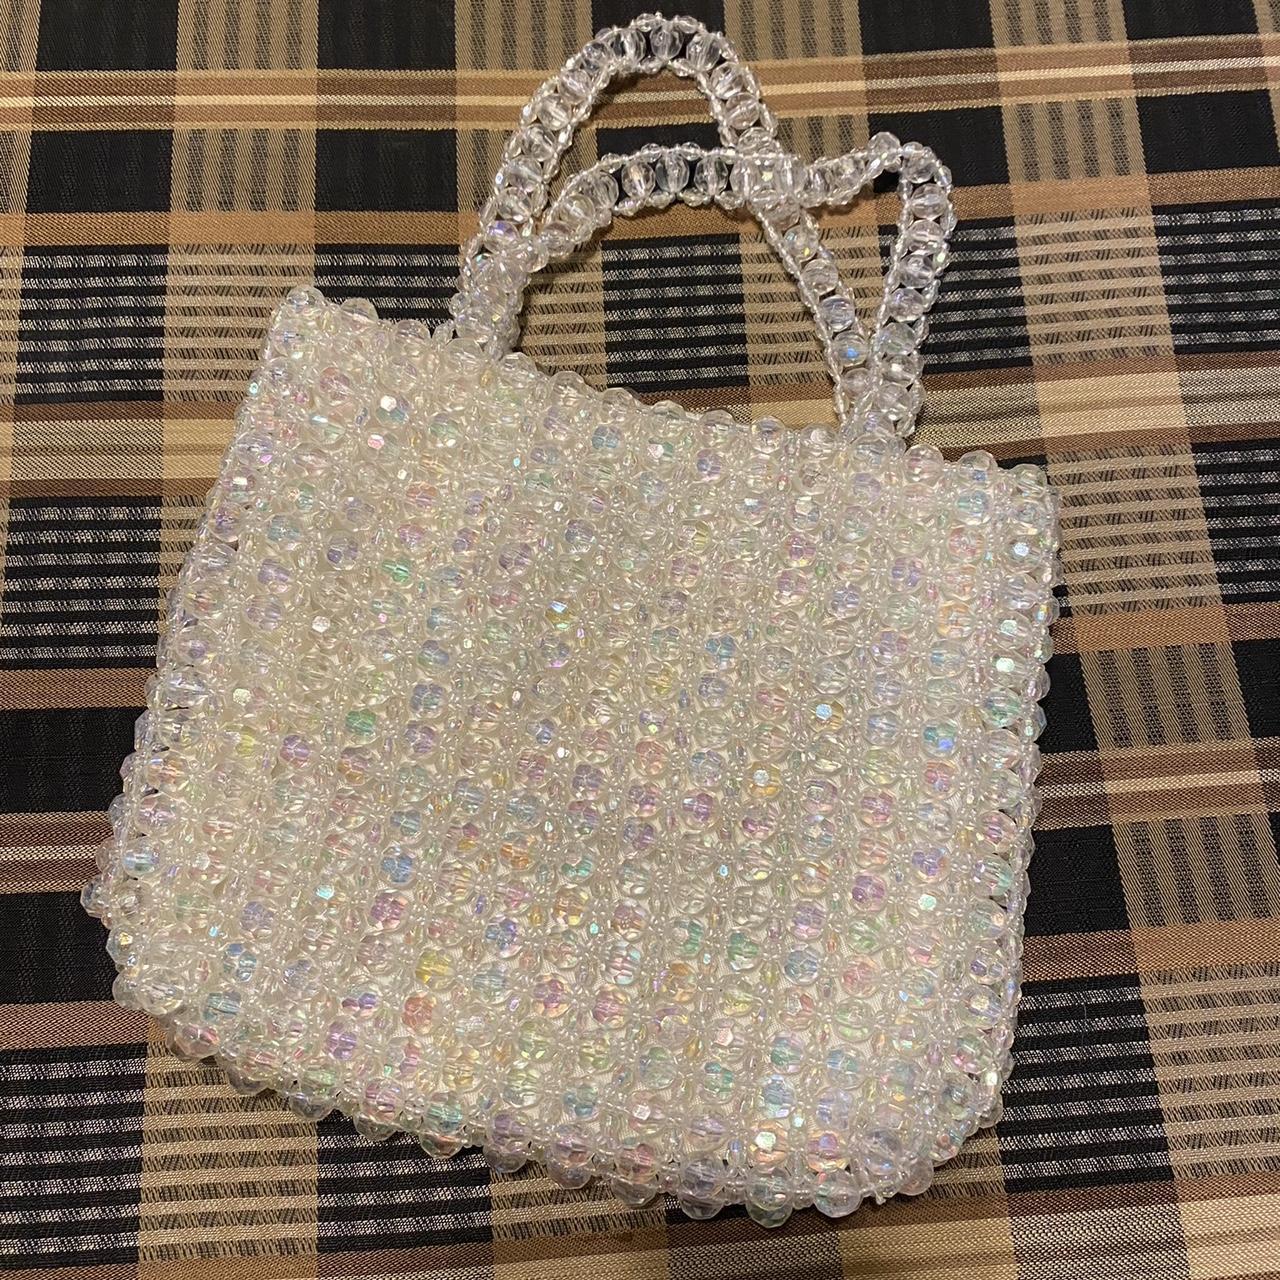 Vintage Beaded Evening Bag, Gold & Clear Iridescent Beads, Gold